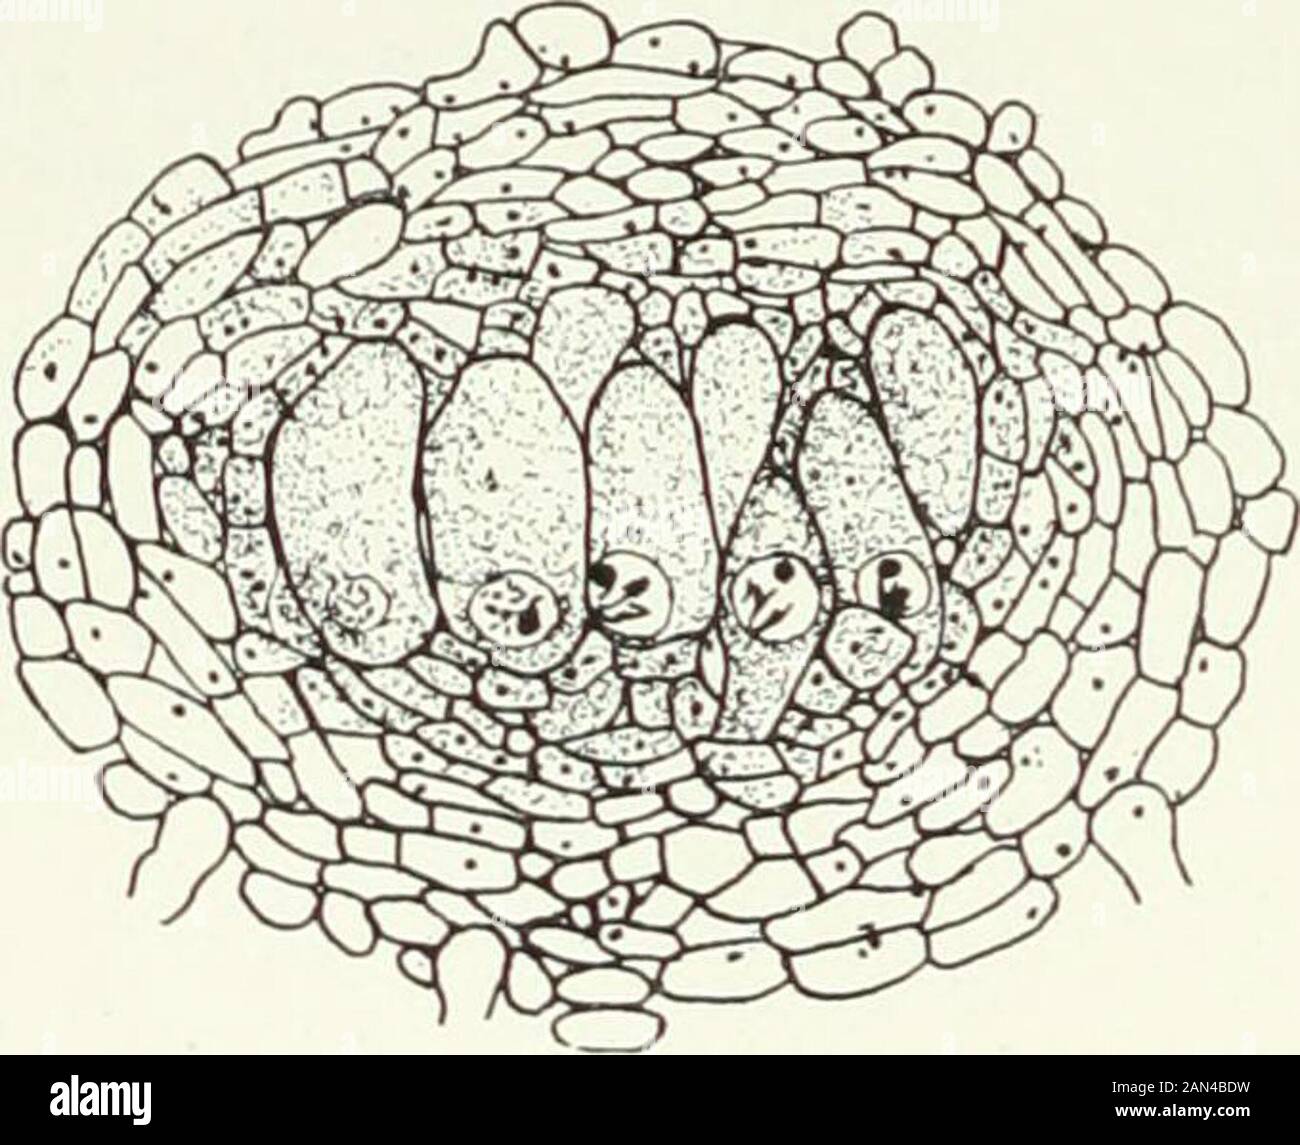 Fungi, Ascomycetes, Ustilaginales, Uredinales . ; the rest, as a rule, are uninucleate. Just after fertilization the sheath begins to grow up (fig. 44 o), springingin this case from the stalk cell of the antheridium, as well as from that ofthe oogonium, and developing into the three layers described above. The ascogenous hyphae arise as lateral branches from the septateoogonium (fig. 44 c), all or most being derived from the penultimate cellabout which they are crowded and intertwined. They are at first multi-nucleate, and, as development proceeds, push up vertically within the peri-thecium (f Stock Photo